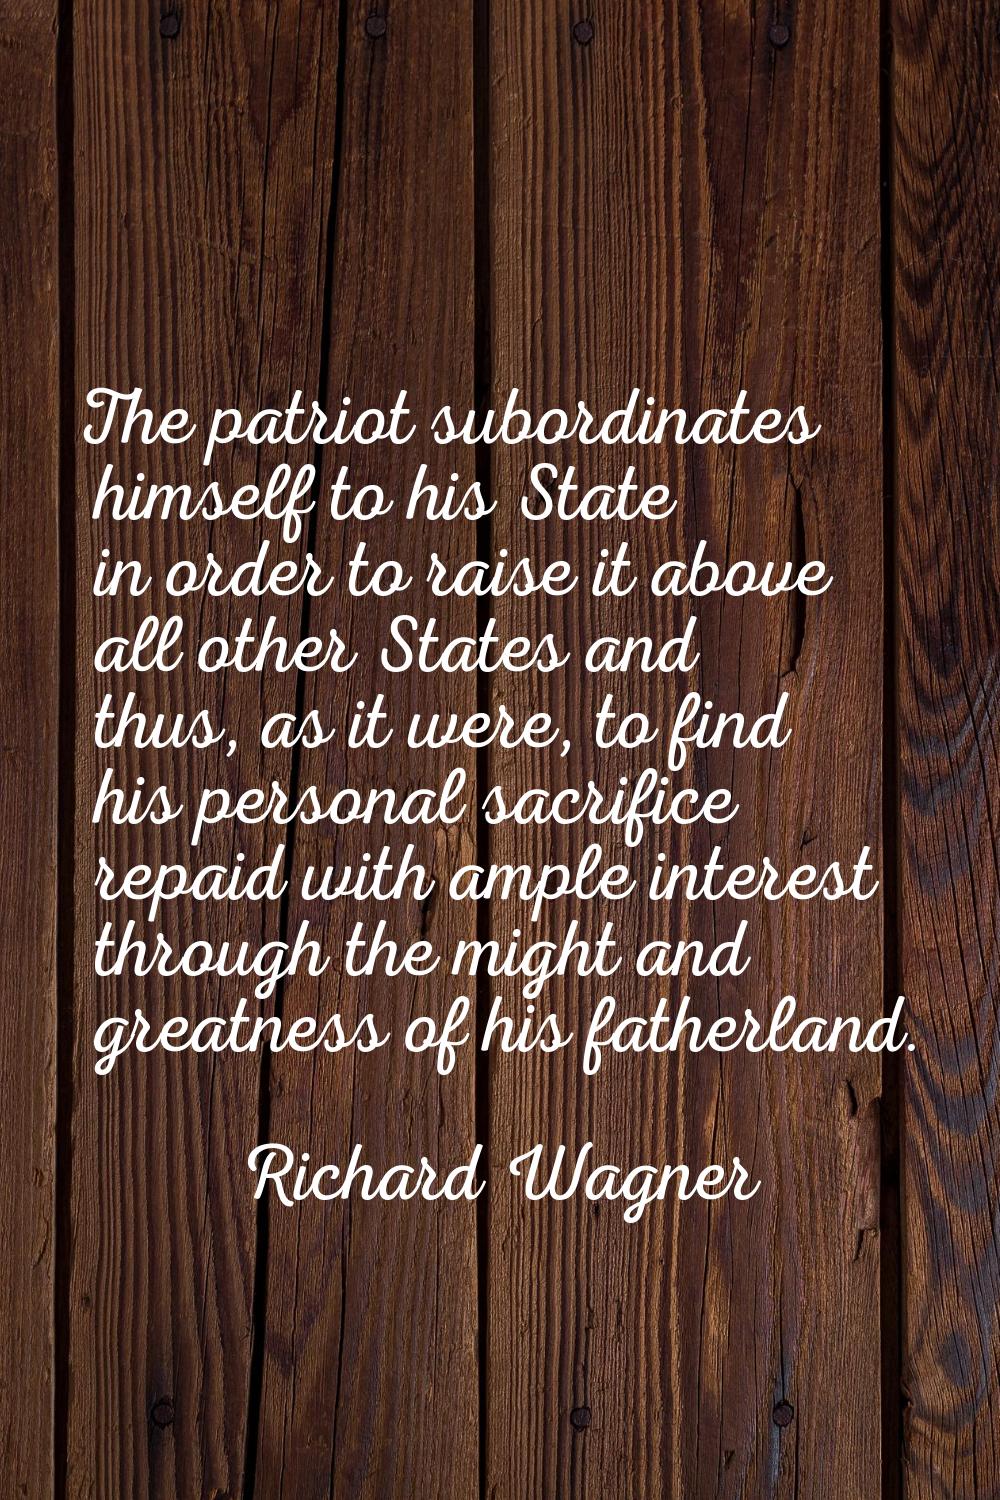 The patriot subordinates himself to his State in order to raise it above all other States and thus,